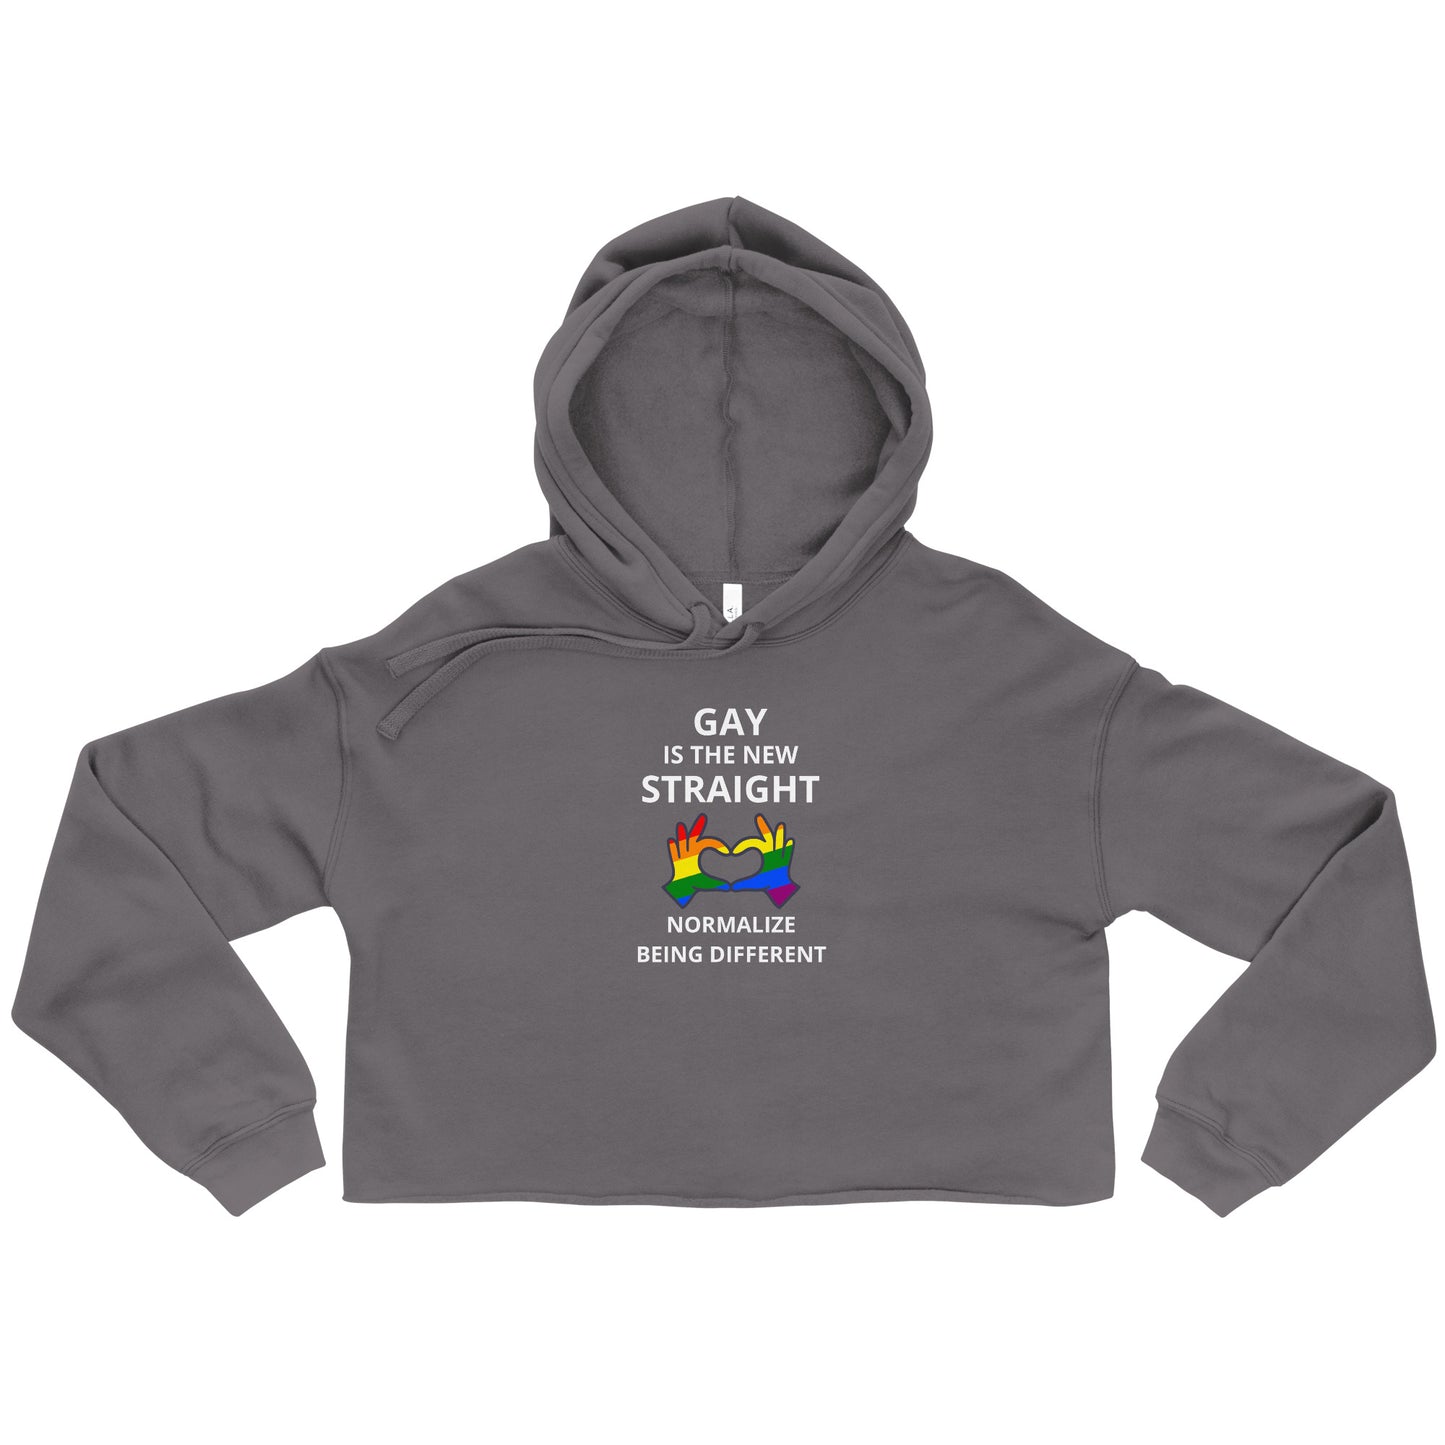 Gay Is The New Straight Crop Hoodie W/ Normalize Being Different